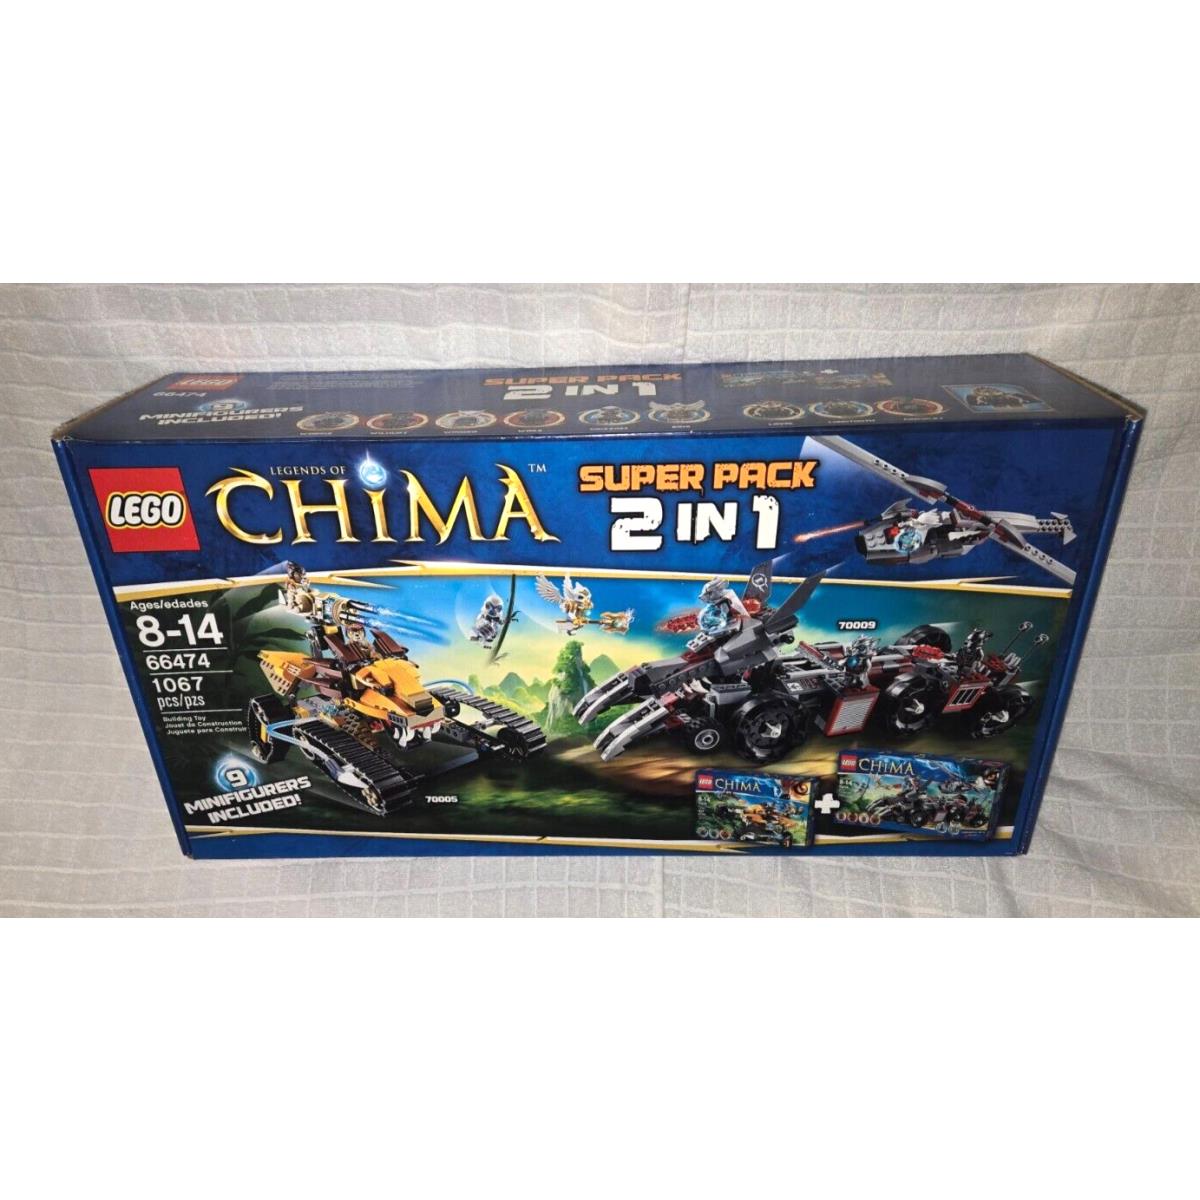 Legends of Chima Lego 66474 Super Pack 2 in 1 Set with 9 Minifigures - 1067 Pcs